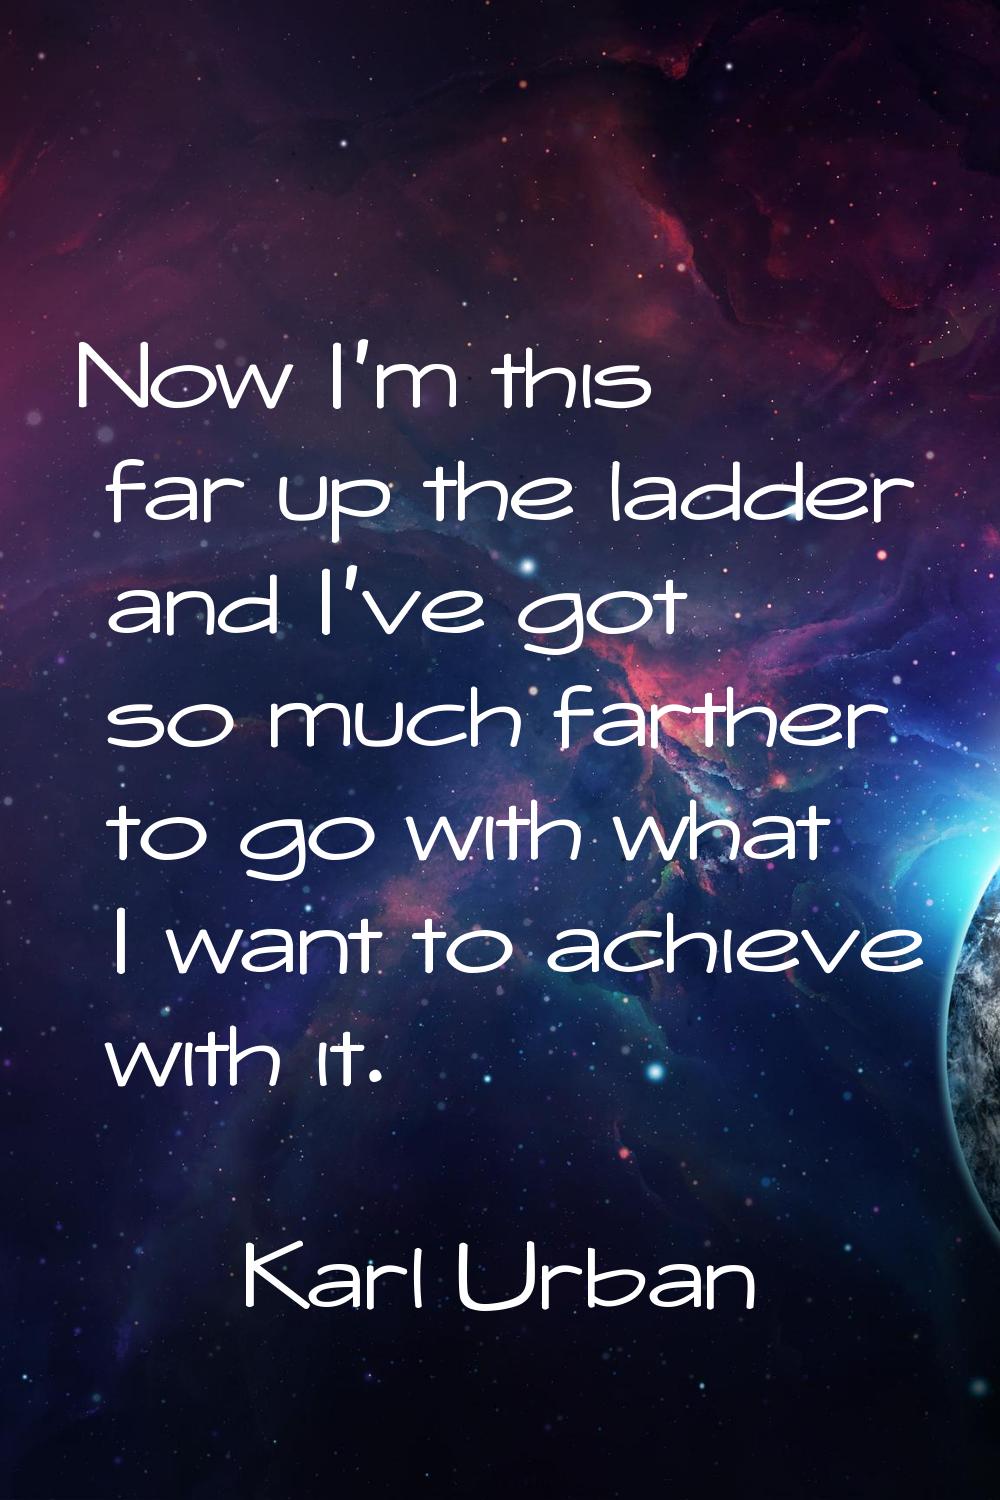 Now I'm this far up the ladder and I've got so much farther to go with what I want to achieve with 